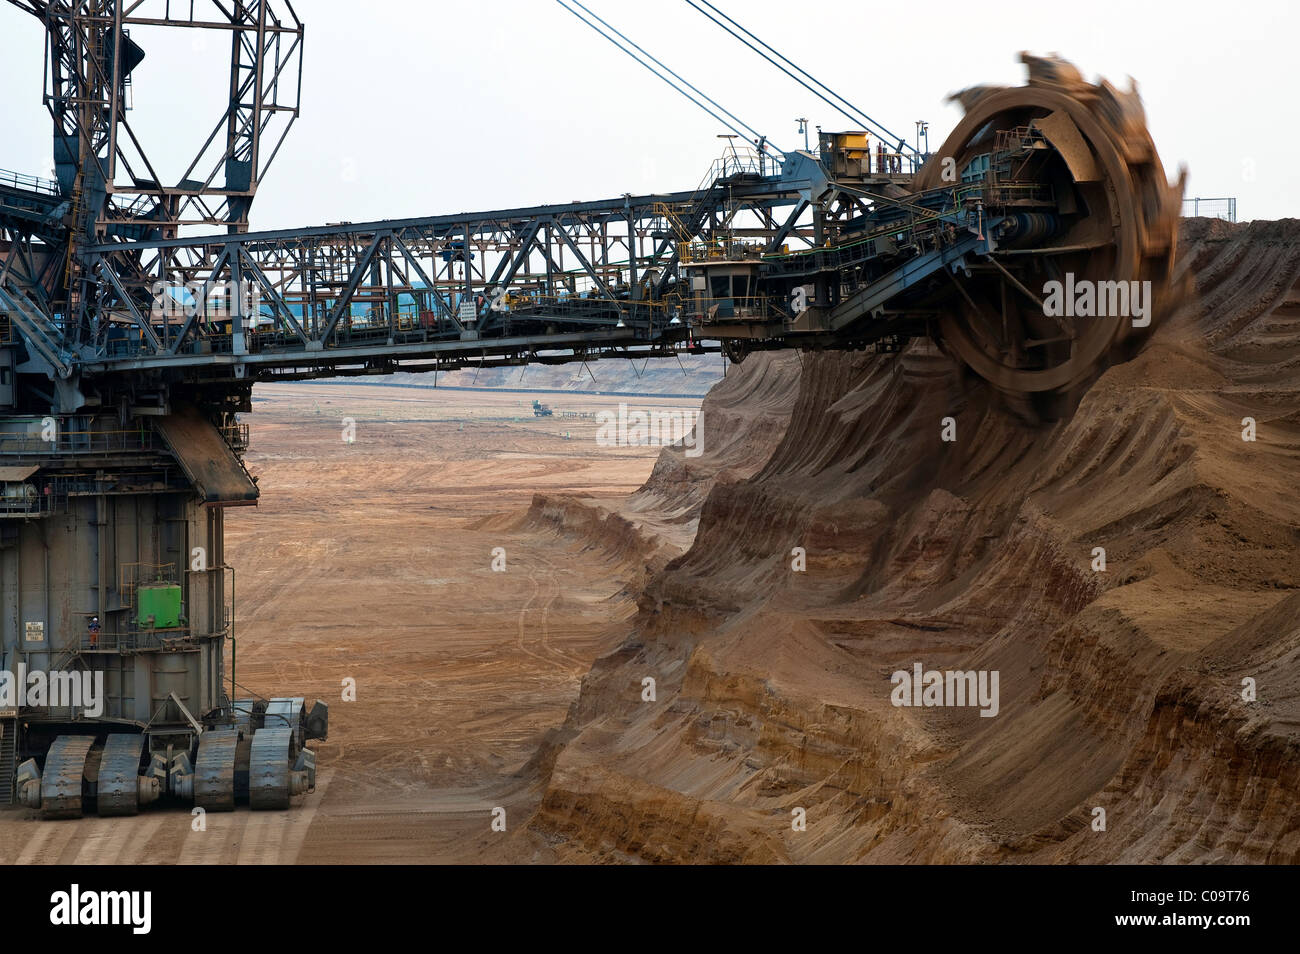 Bucket-wheel excavator on the slope of the open pit, Grevenbroich, North Rhine-Westphalia, Germany, Europe Stock Photo